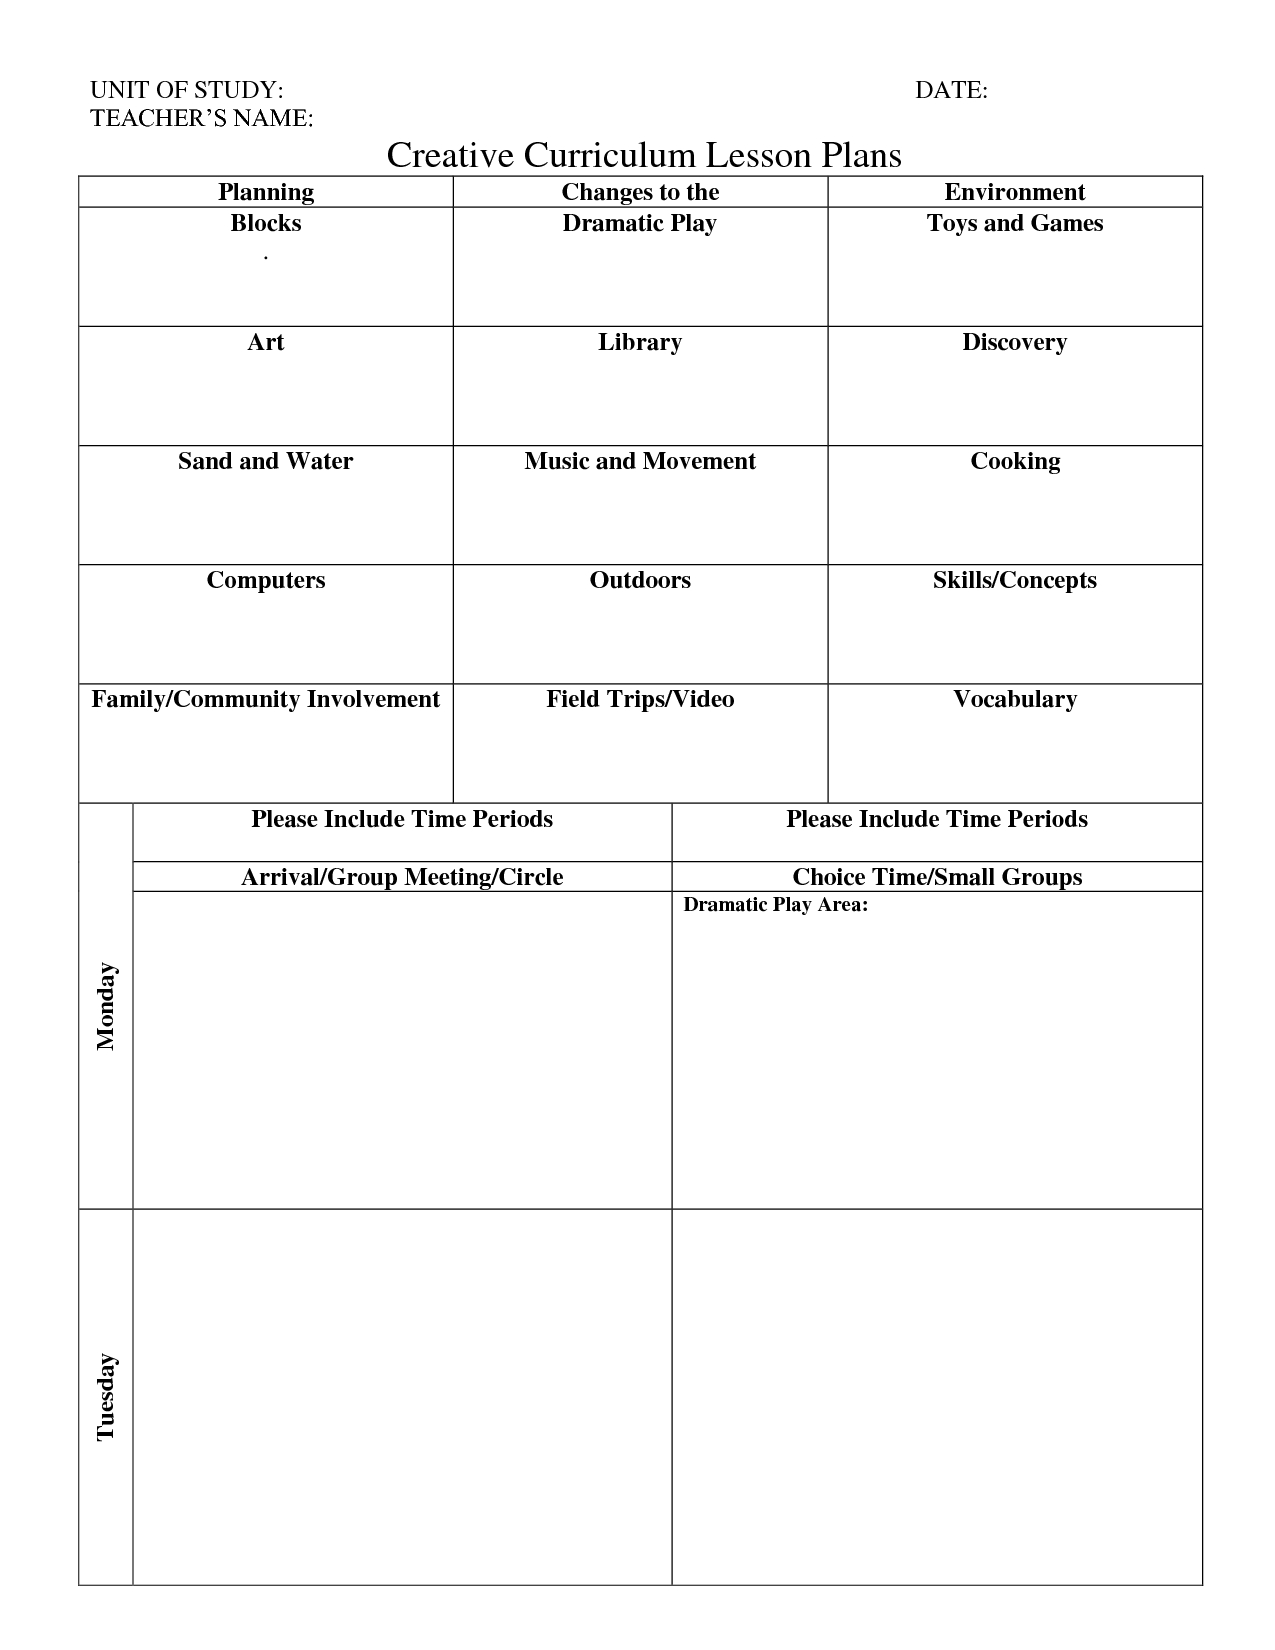 Image Result For Print Creative Curriculum Lesson Plan Blank With Blank Syllabus Template